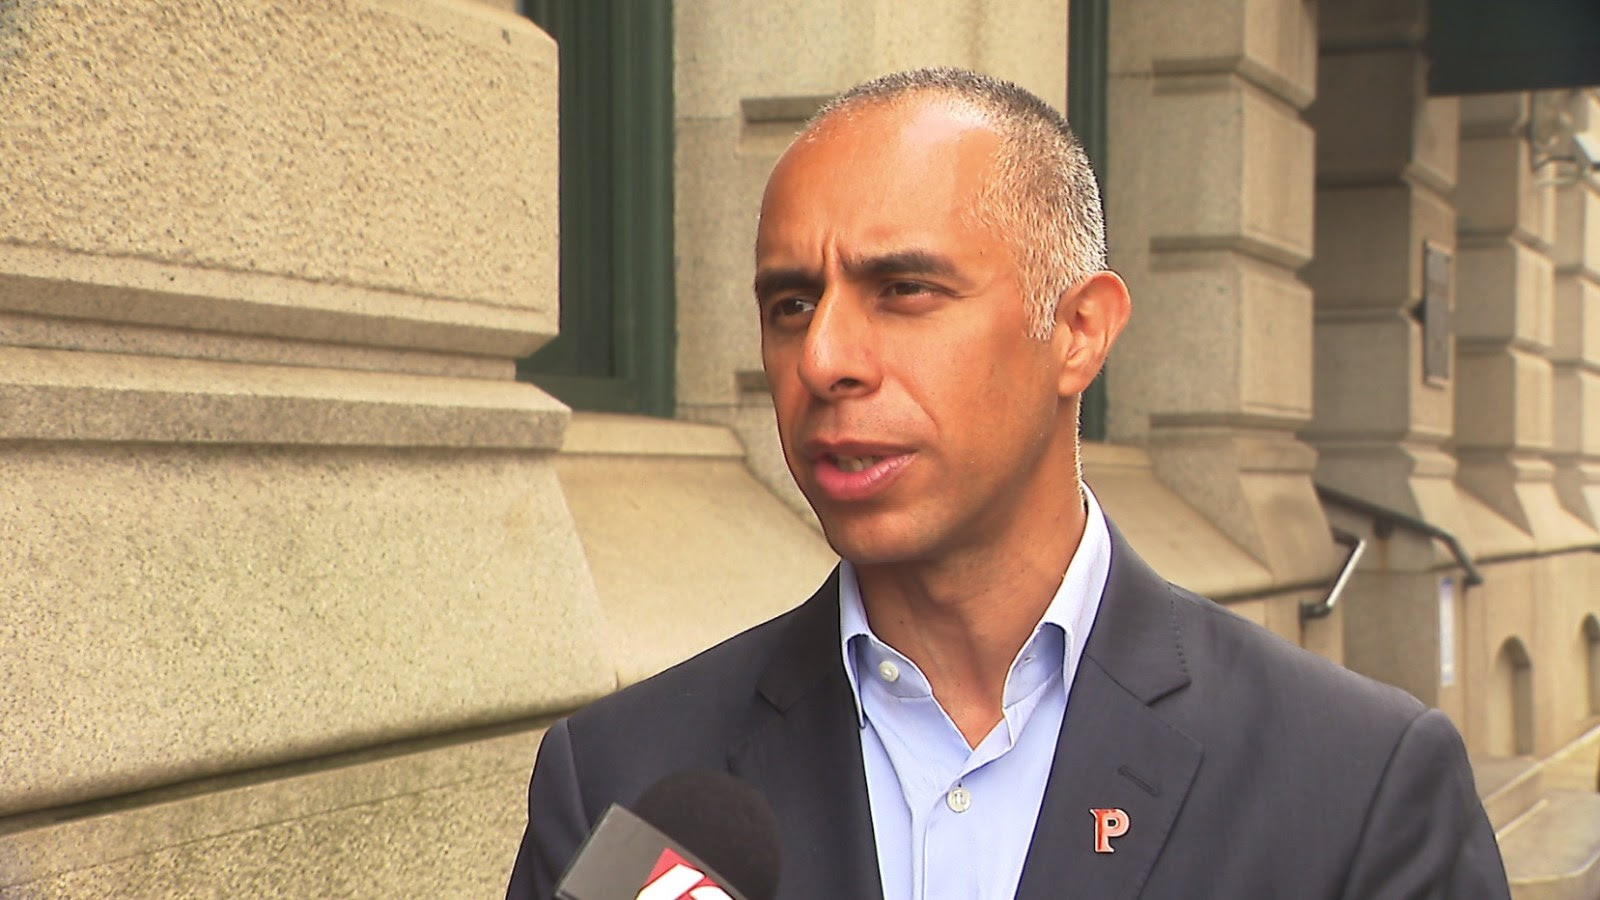 Mayor Elorza tests positive for COVID-19